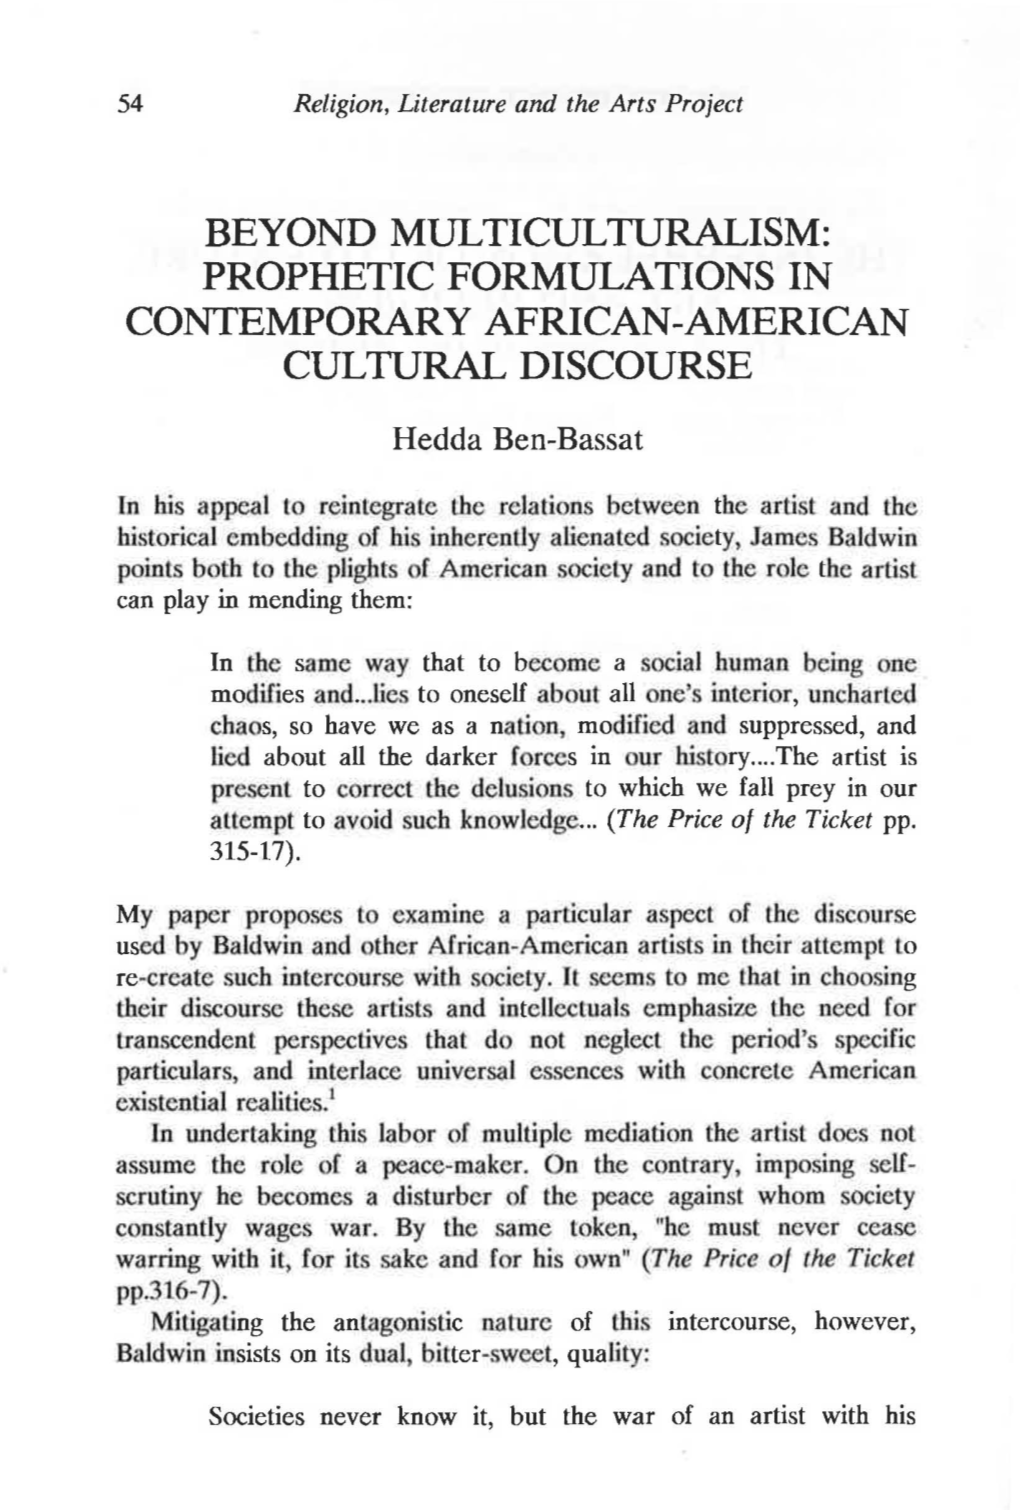 Prophetic Formulations in Contemporary African-American Cultural Discourse